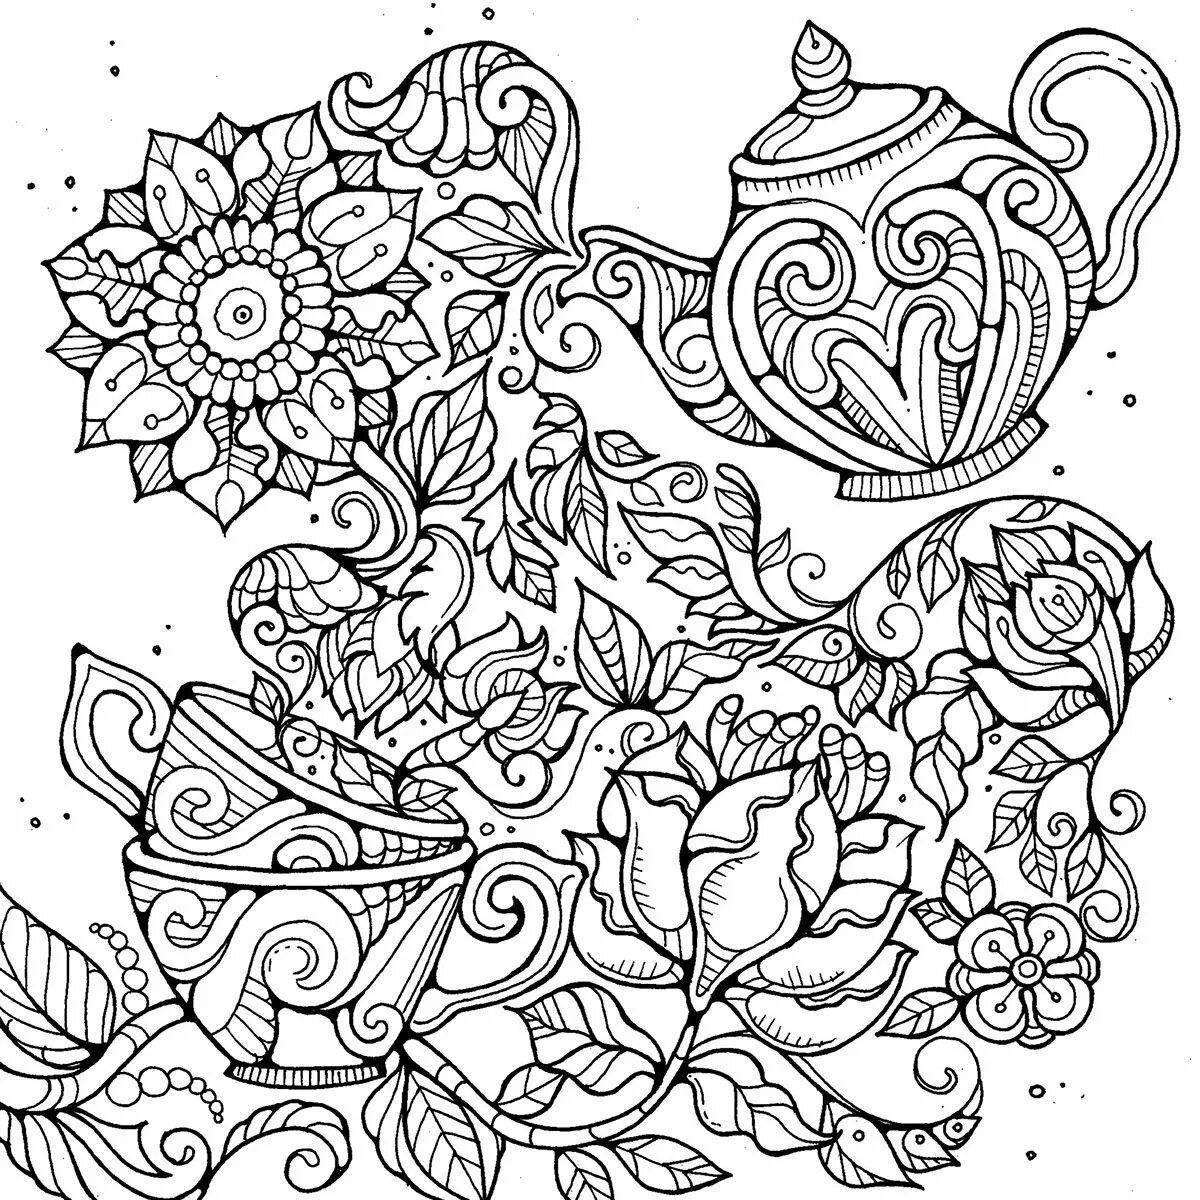 Exciting men antistress coloring pages